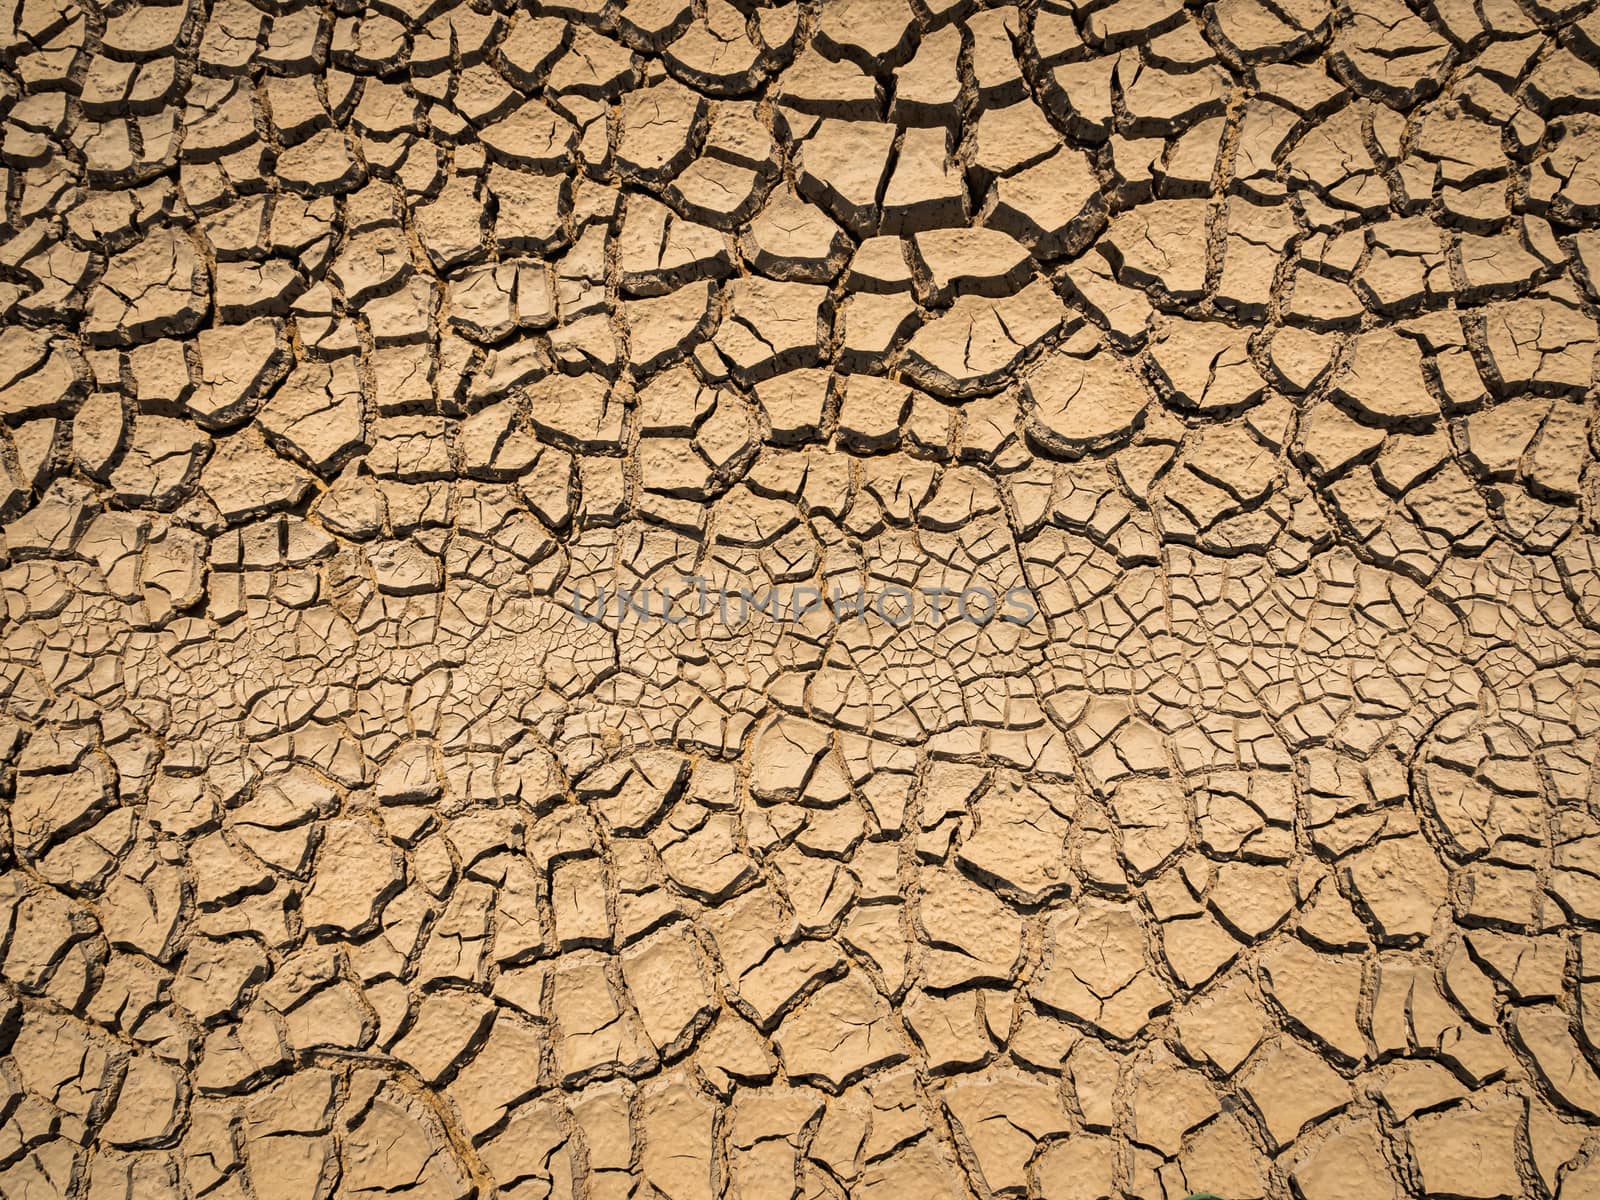 dried and cracked soil in arid season. by lavoview